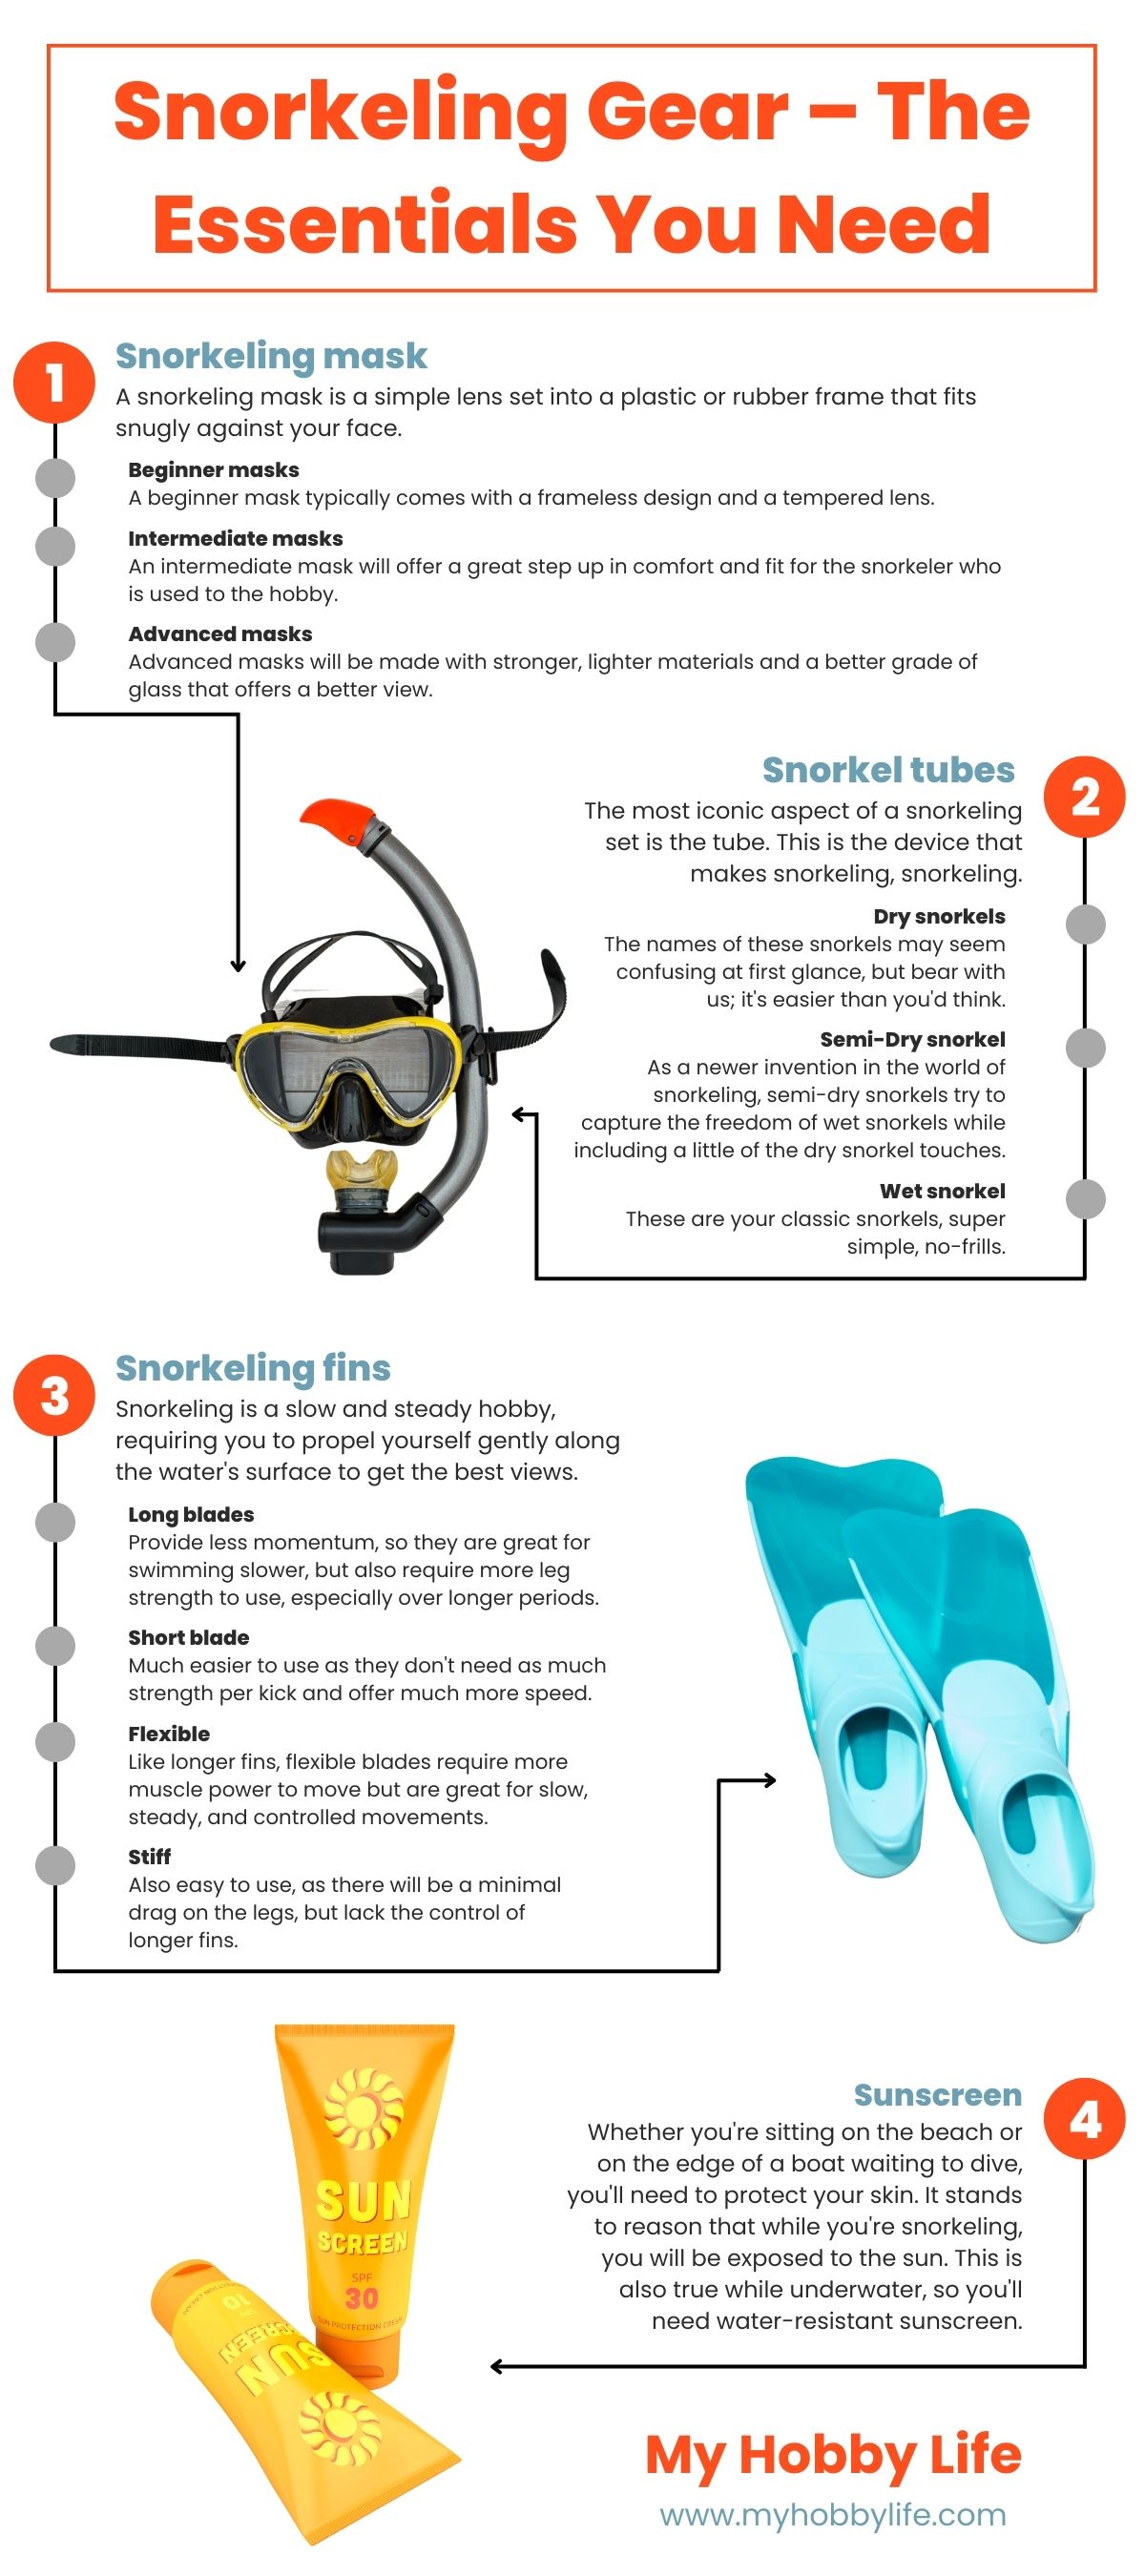 an overview of essential snorkeling gear